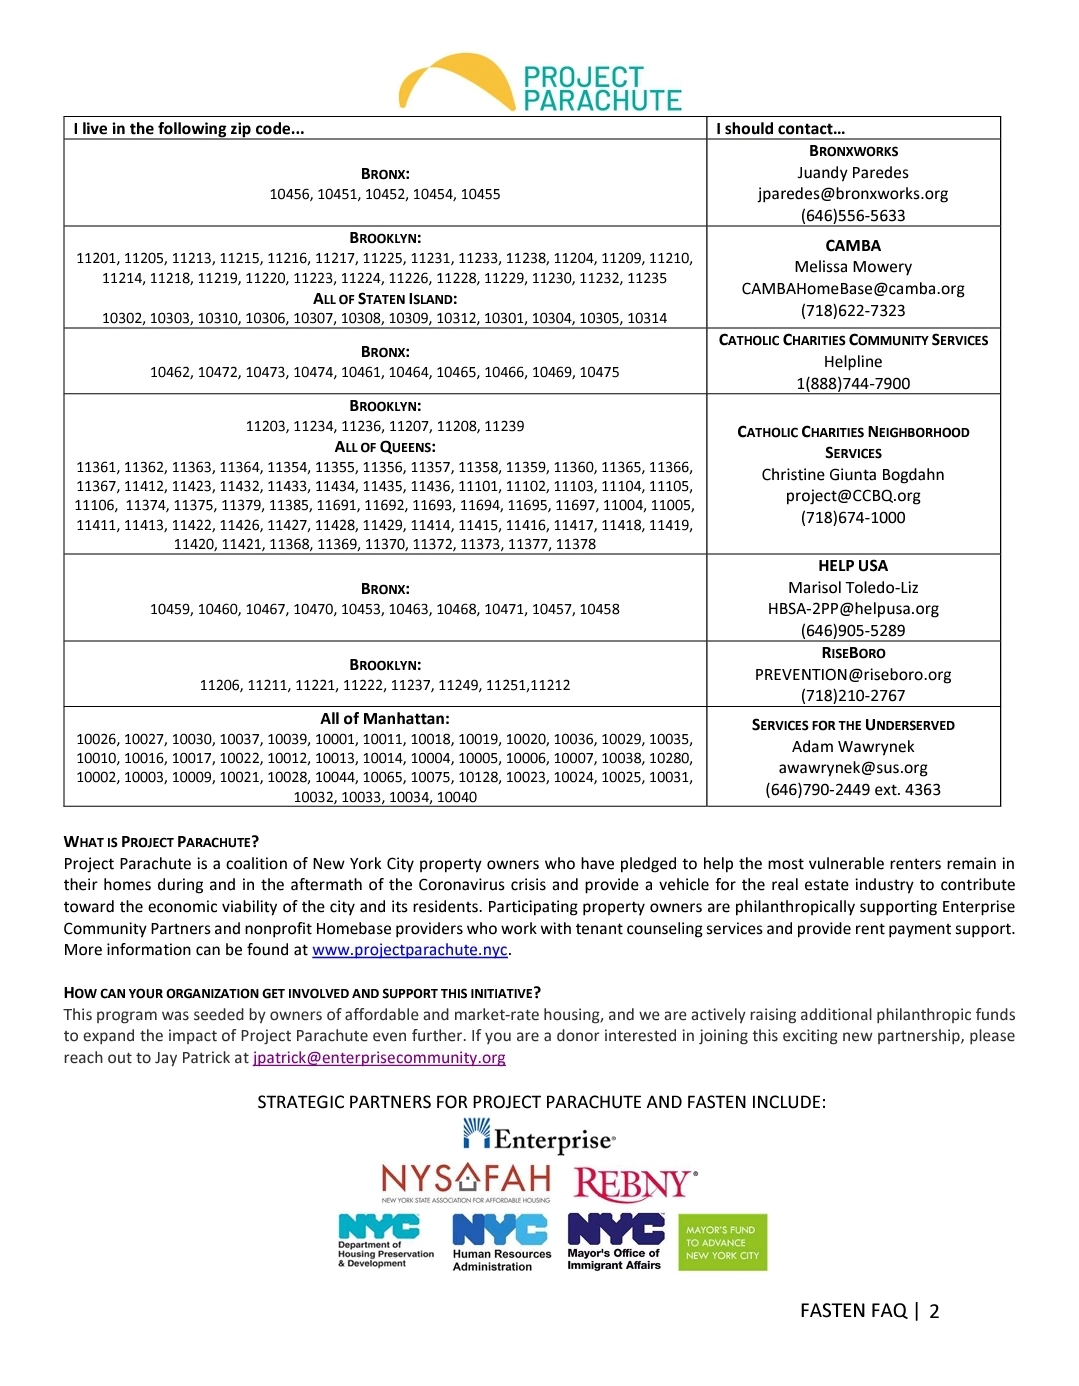 A page of the 2 0 1 9-2 0 nysear rent calendar.